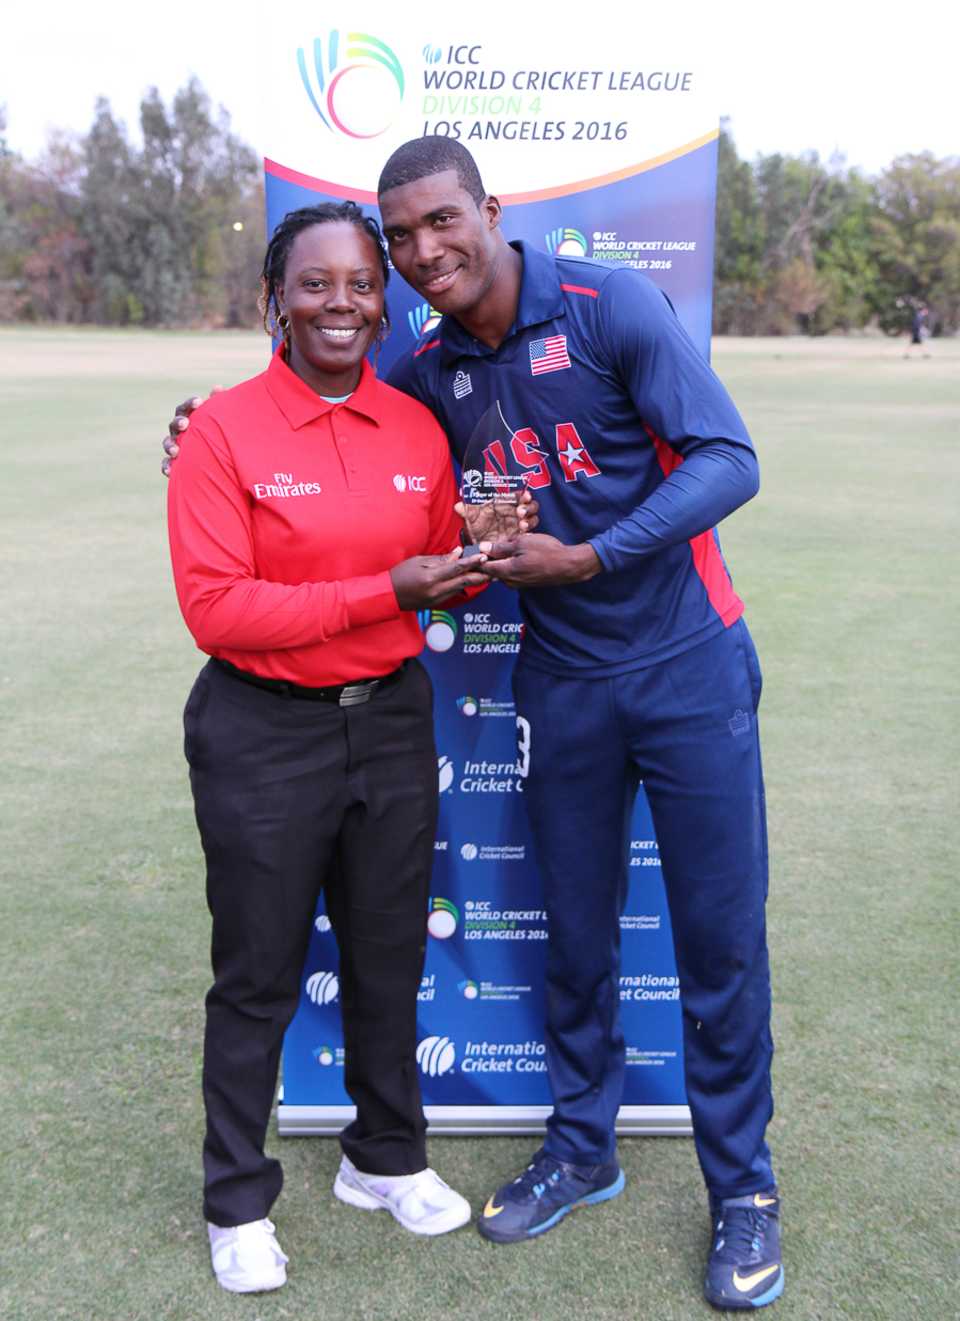 Timroy Allen accepts the Man of the Match award from umpire Jacqueline Williams, USA v Italy, ICC World Cricket League Division Four, Los Angeles, October 30, 2016